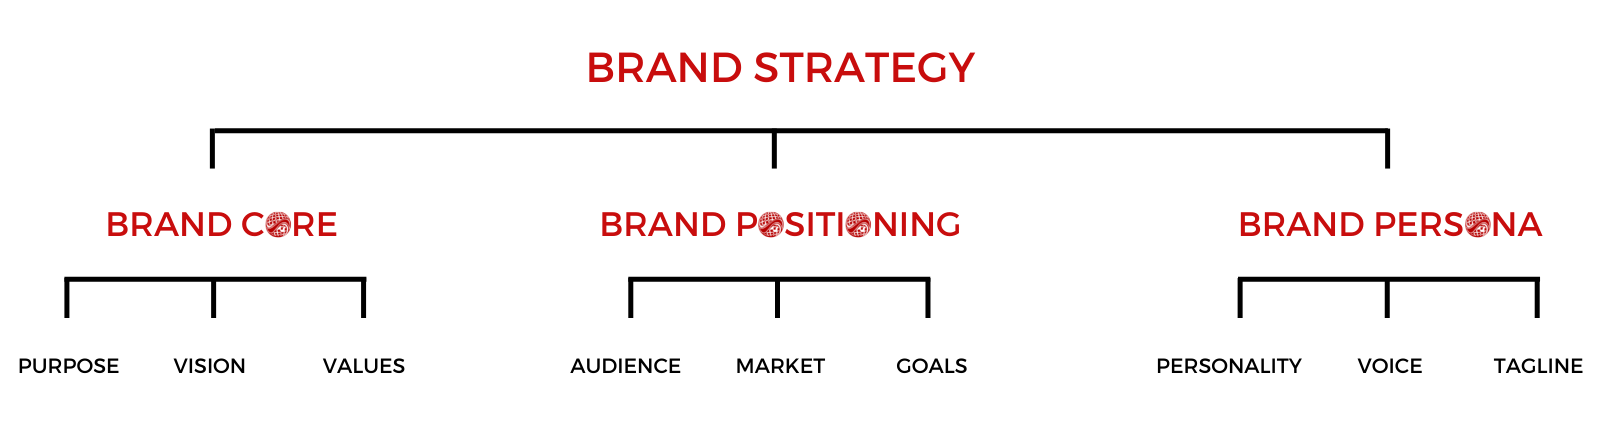 Elements of Brand Strategy